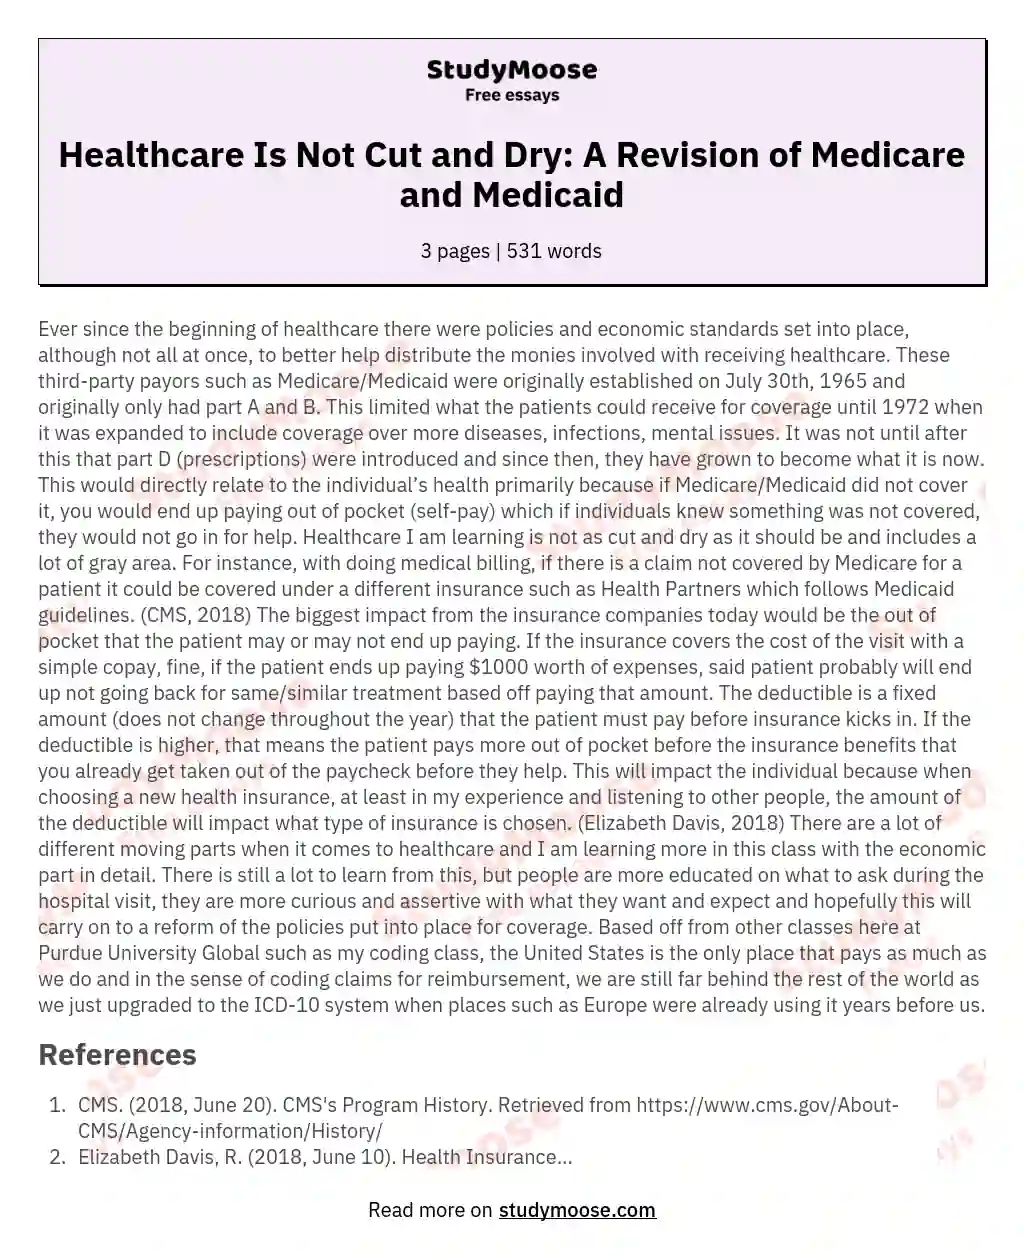 Healthcare Is Not Cut and Dry: A Revision of Medicare and Medicaid essay